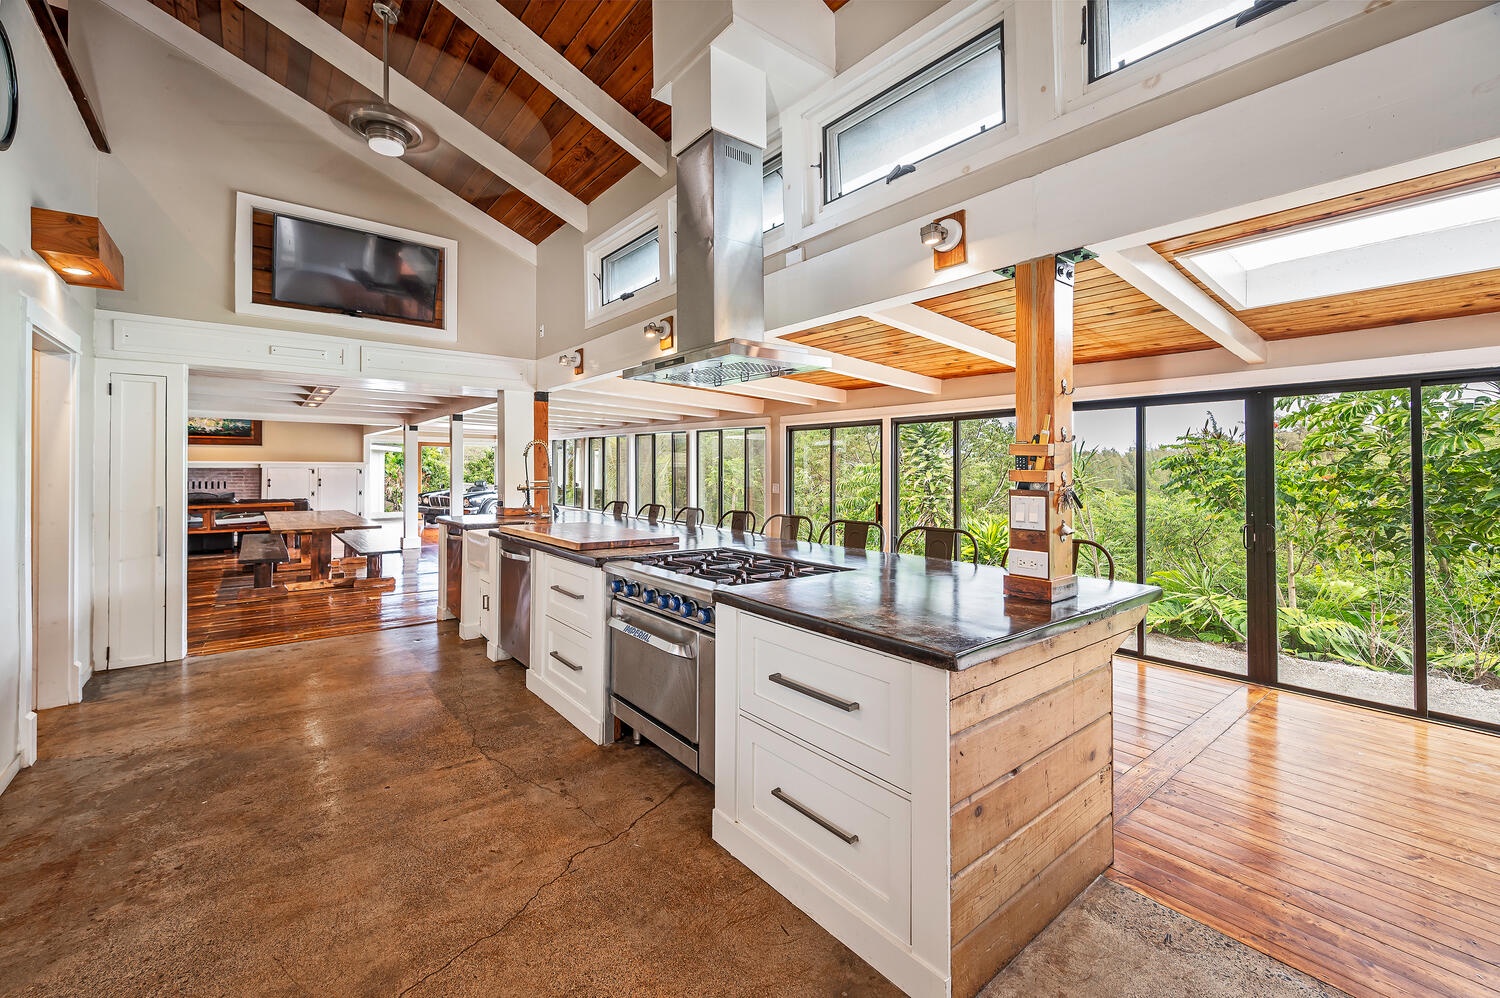 Haleiwa Vacation Rentals, Mele Makana - The massive kitchen features stainless steel appliances and ample counter space including Smart TV.